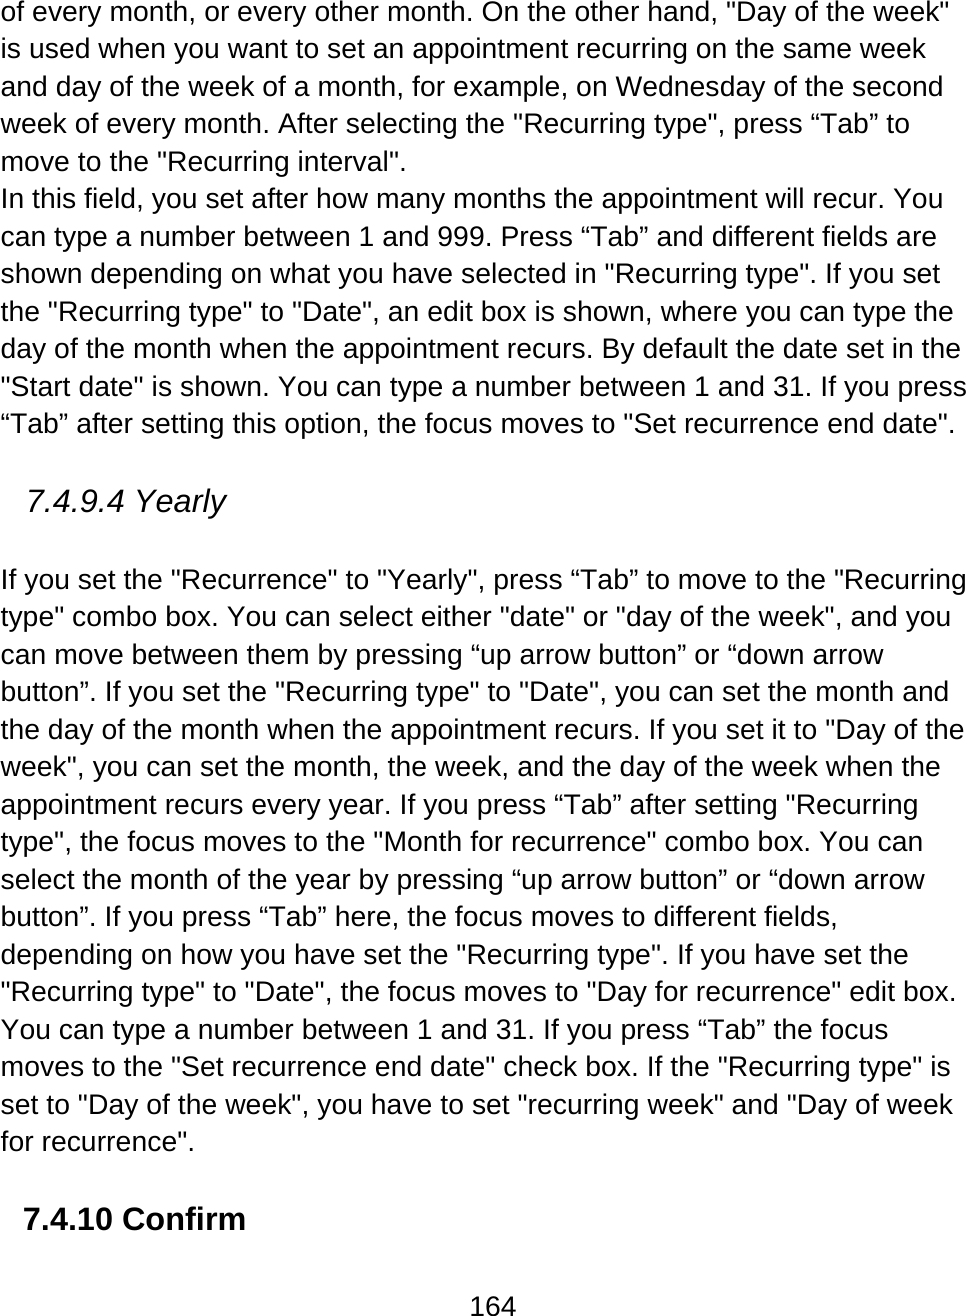 164  of every month, or every other month. On the other hand, &quot;Day of the week&quot; is used when you want to set an appointment recurring on the same week and day of the week of a month, for example, on Wednesday of the second week of every month. After selecting the &quot;Recurring type&quot;, press “Tab” to move to the &quot;Recurring interval&quot;.  In this field, you set after how many months the appointment will recur. You can type a number between 1 and 999. Press “Tab” and different fields are shown depending on what you have selected in &quot;Recurring type&quot;. If you set the &quot;Recurring type&quot; to &quot;Date&quot;, an edit box is shown, where you can type the day of the month when the appointment recurs. By default the date set in the &quot;Start date&quot; is shown. You can type a number between 1 and 31. If you press “Tab” after setting this option, the focus moves to &quot;Set recurrence end date&quot;.  7.4.9.4 Yearly  If you set the &quot;Recurrence&quot; to &quot;Yearly&quot;, press “Tab” to move to the &quot;Recurring type&quot; combo box. You can select either &quot;date&quot; or &quot;day of the week&quot;, and you can move between them by pressing “up arrow button” or “down arrow button”. If you set the &quot;Recurring type&quot; to &quot;Date&quot;, you can set the month and the day of the month when the appointment recurs. If you set it to &quot;Day of the week&quot;, you can set the month, the week, and the day of the week when the appointment recurs every year. If you press “Tab” after setting &quot;Recurring type&quot;, the focus moves to the &quot;Month for recurrence&quot; combo box. You can select the month of the year by pressing “up arrow button” or “down arrow button”. If you press “Tab” here, the focus moves to different fields, depending on how you have set the &quot;Recurring type&quot;. If you have set the &quot;Recurring type&quot; to &quot;Date&quot;, the focus moves to &quot;Day for recurrence&quot; edit box. You can type a number between 1 and 31. If you press “Tab” the focus moves to the &quot;Set recurrence end date&quot; check box. If the &quot;Recurring type&quot; is set to &quot;Day of the week&quot;, you have to set &quot;recurring week&quot; and &quot;Day of week for recurrence&quot;.   7.4.10 Confirm  